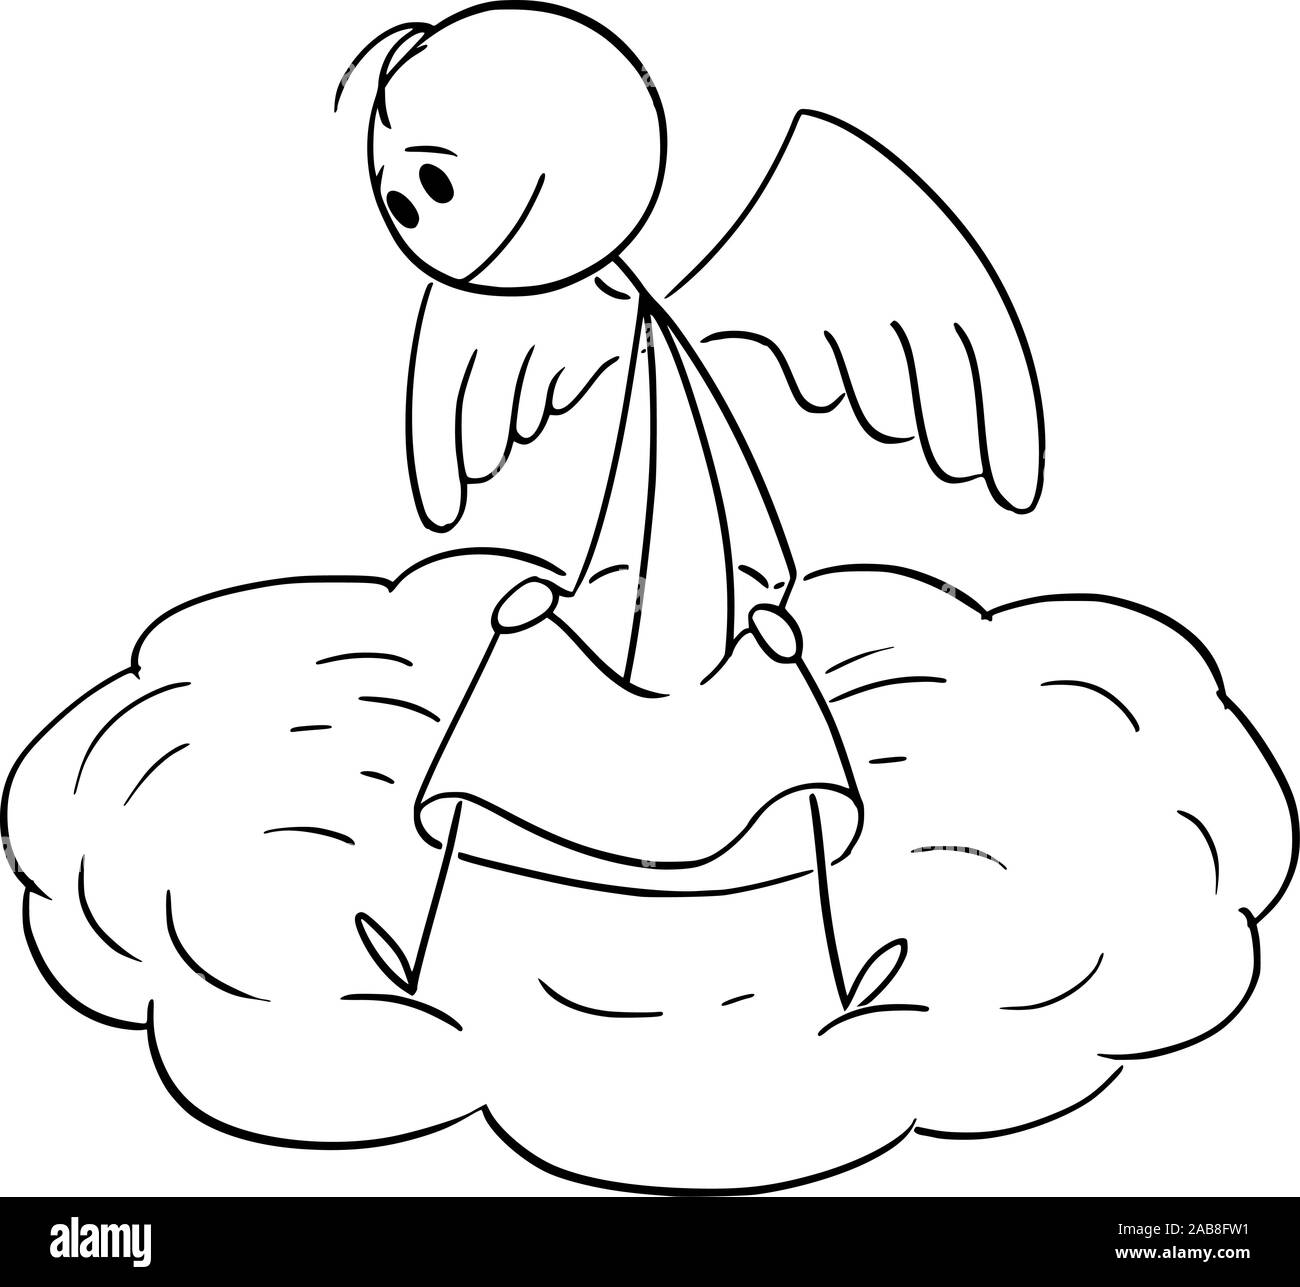 Vector cartoon stick figure drawing conceptual illustration of man sitting on cloud and watching down the world. Stock Vector